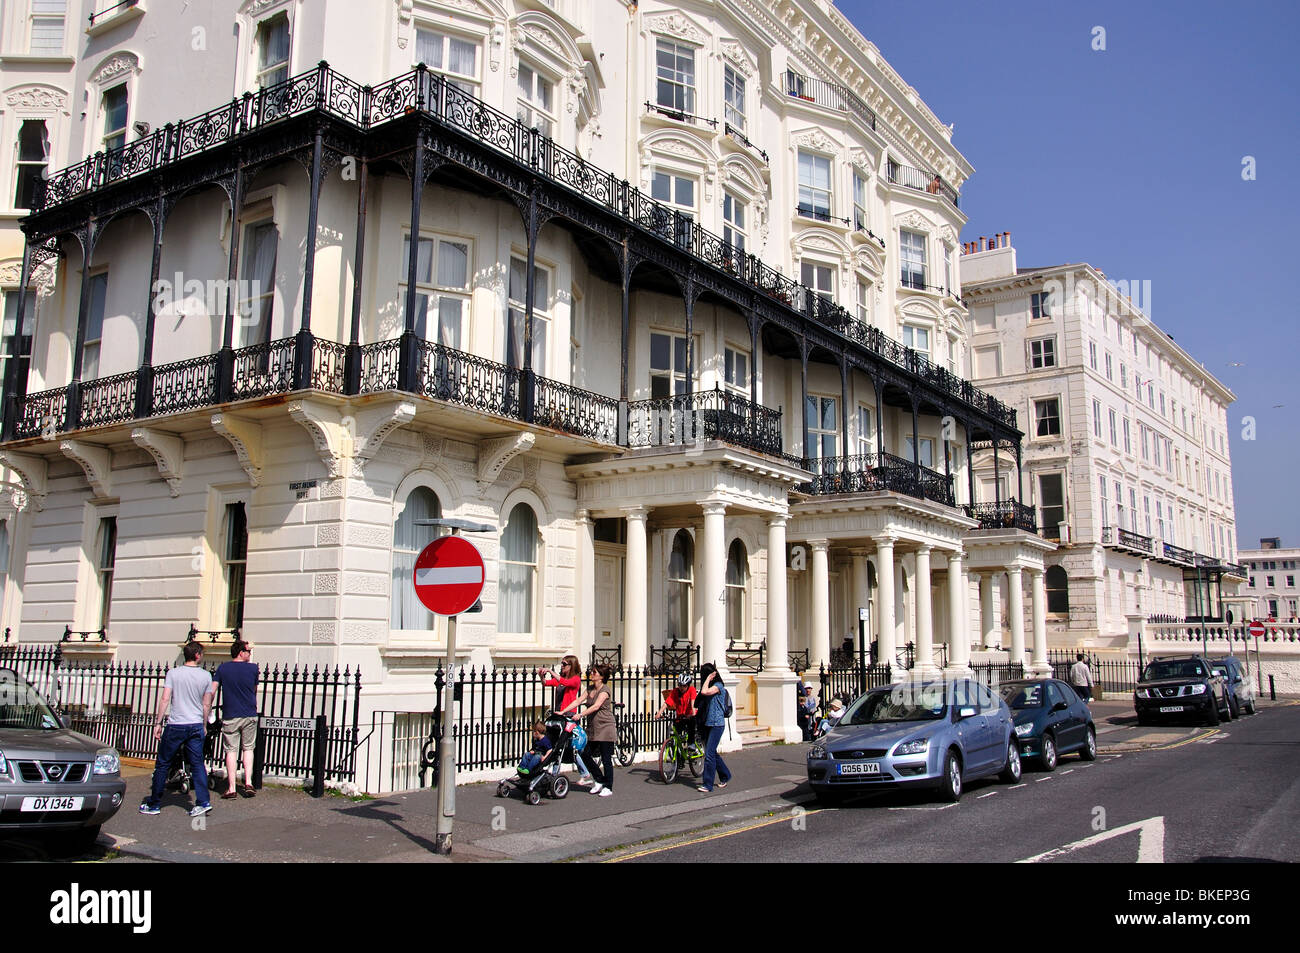 Regency seafront building, Kingsway, Hove, East Sussex, England, United Kingdom Stock Photo